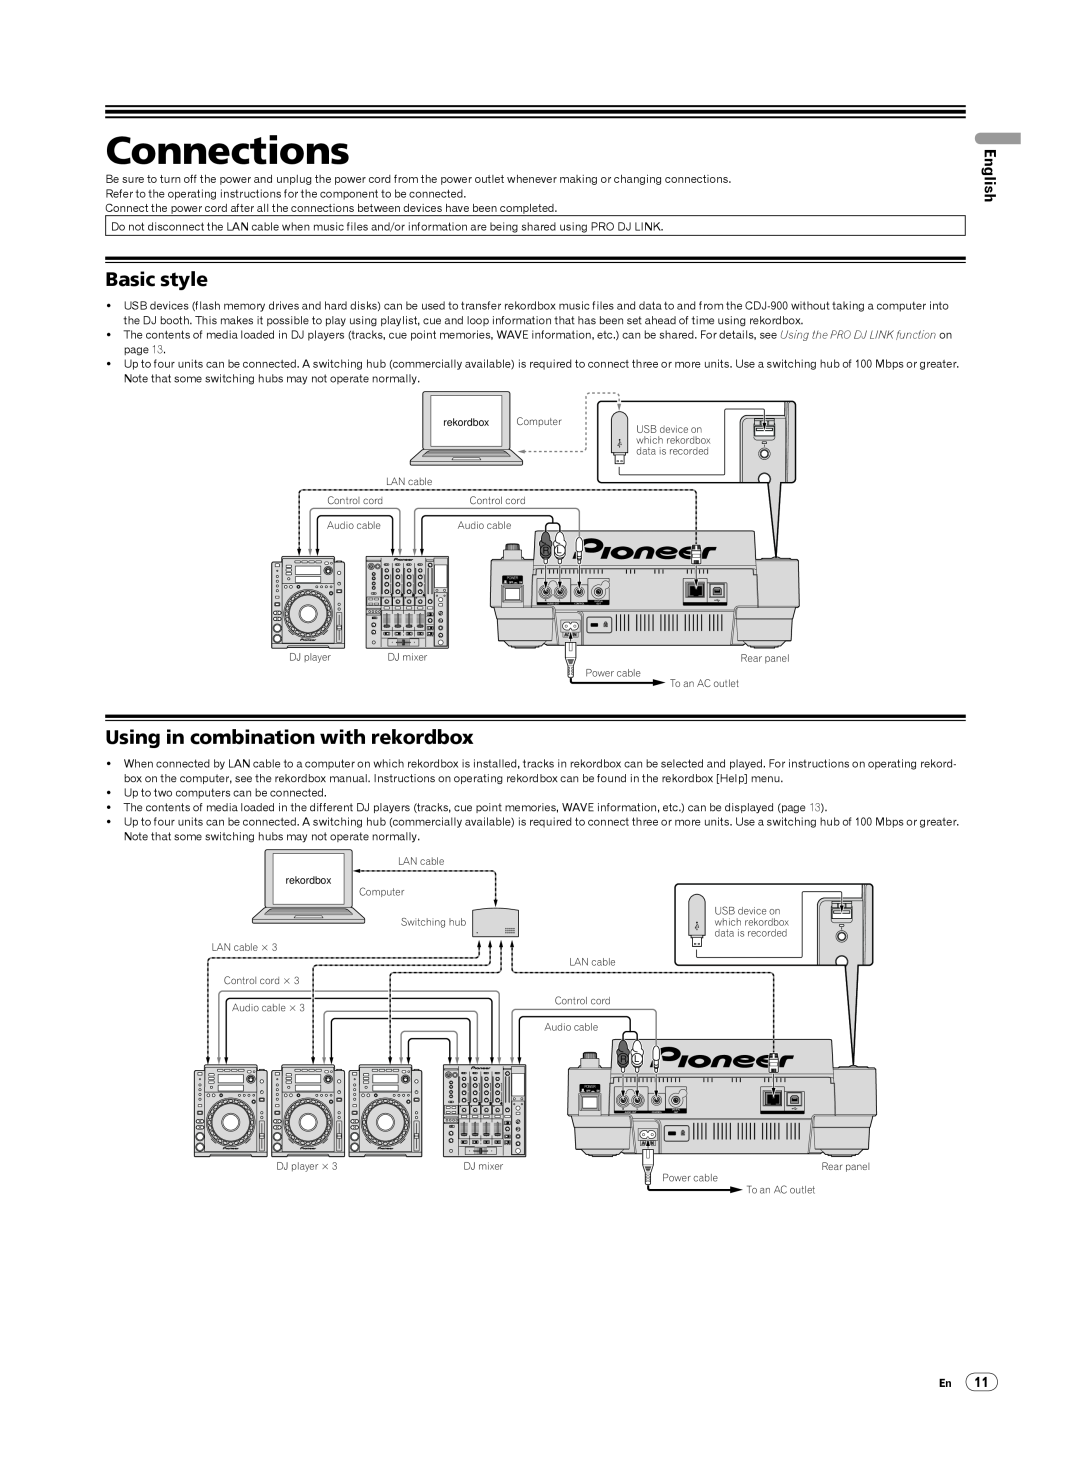 Pioneer Multi Player, CDJ-900 operating instructions Connections, Basic style, Using in combination with rekordbox, English 